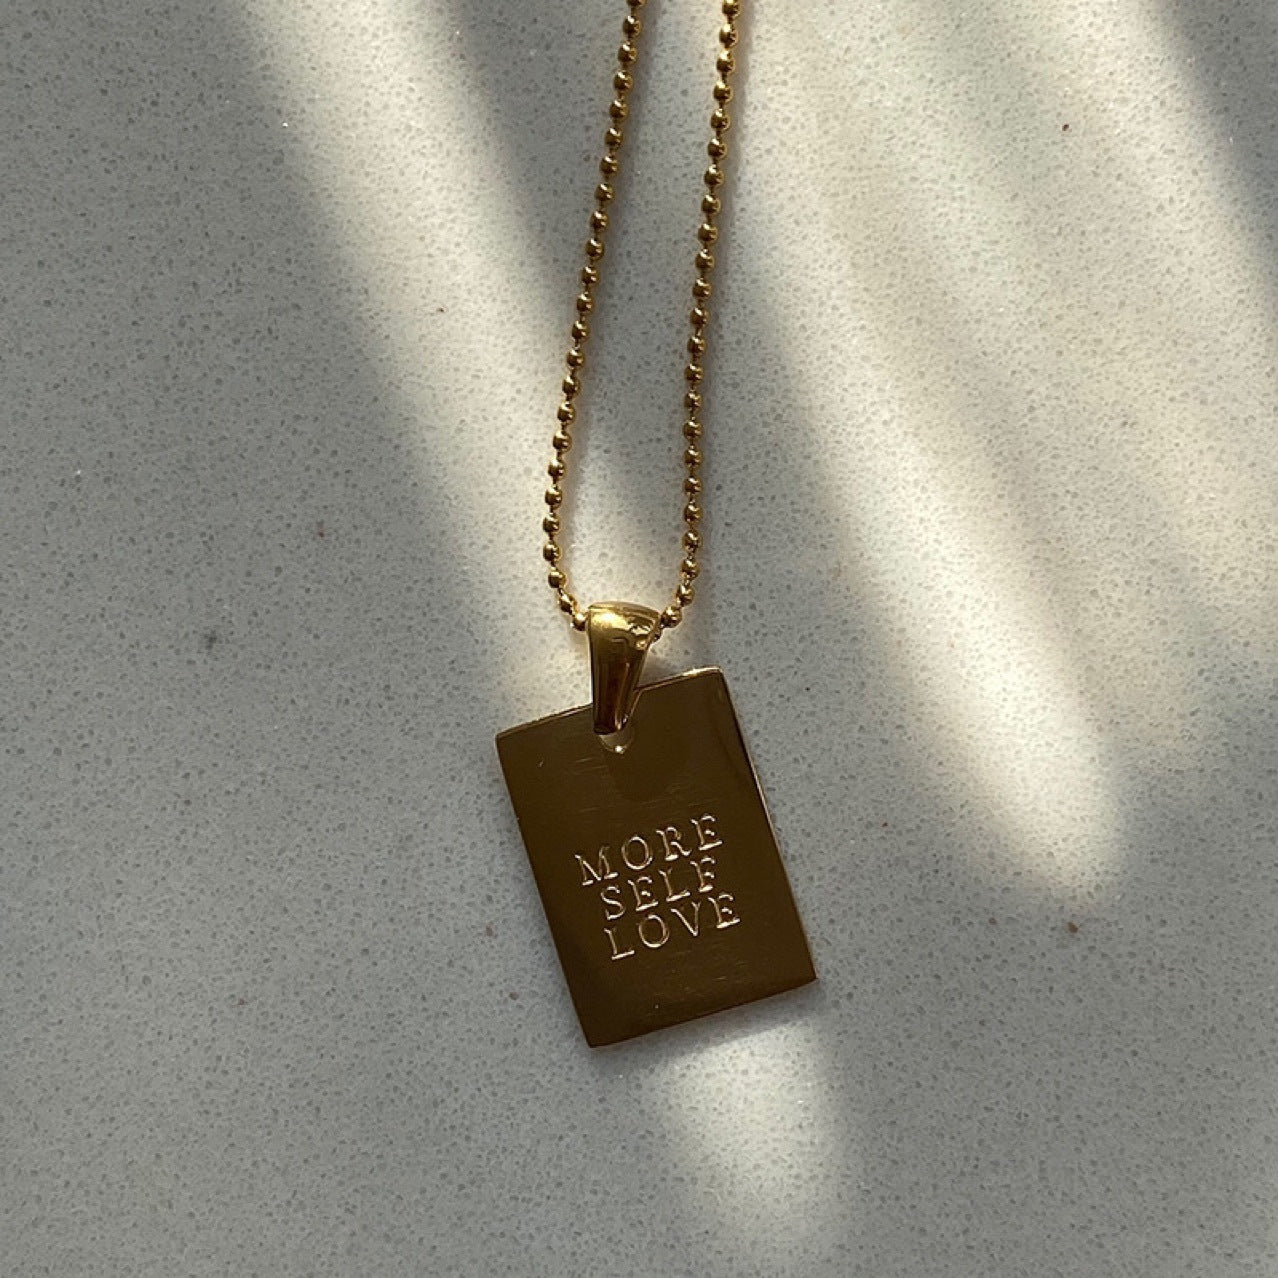 Engraved Inspiring Quote Necklace Empowerment Necklace Waterproof